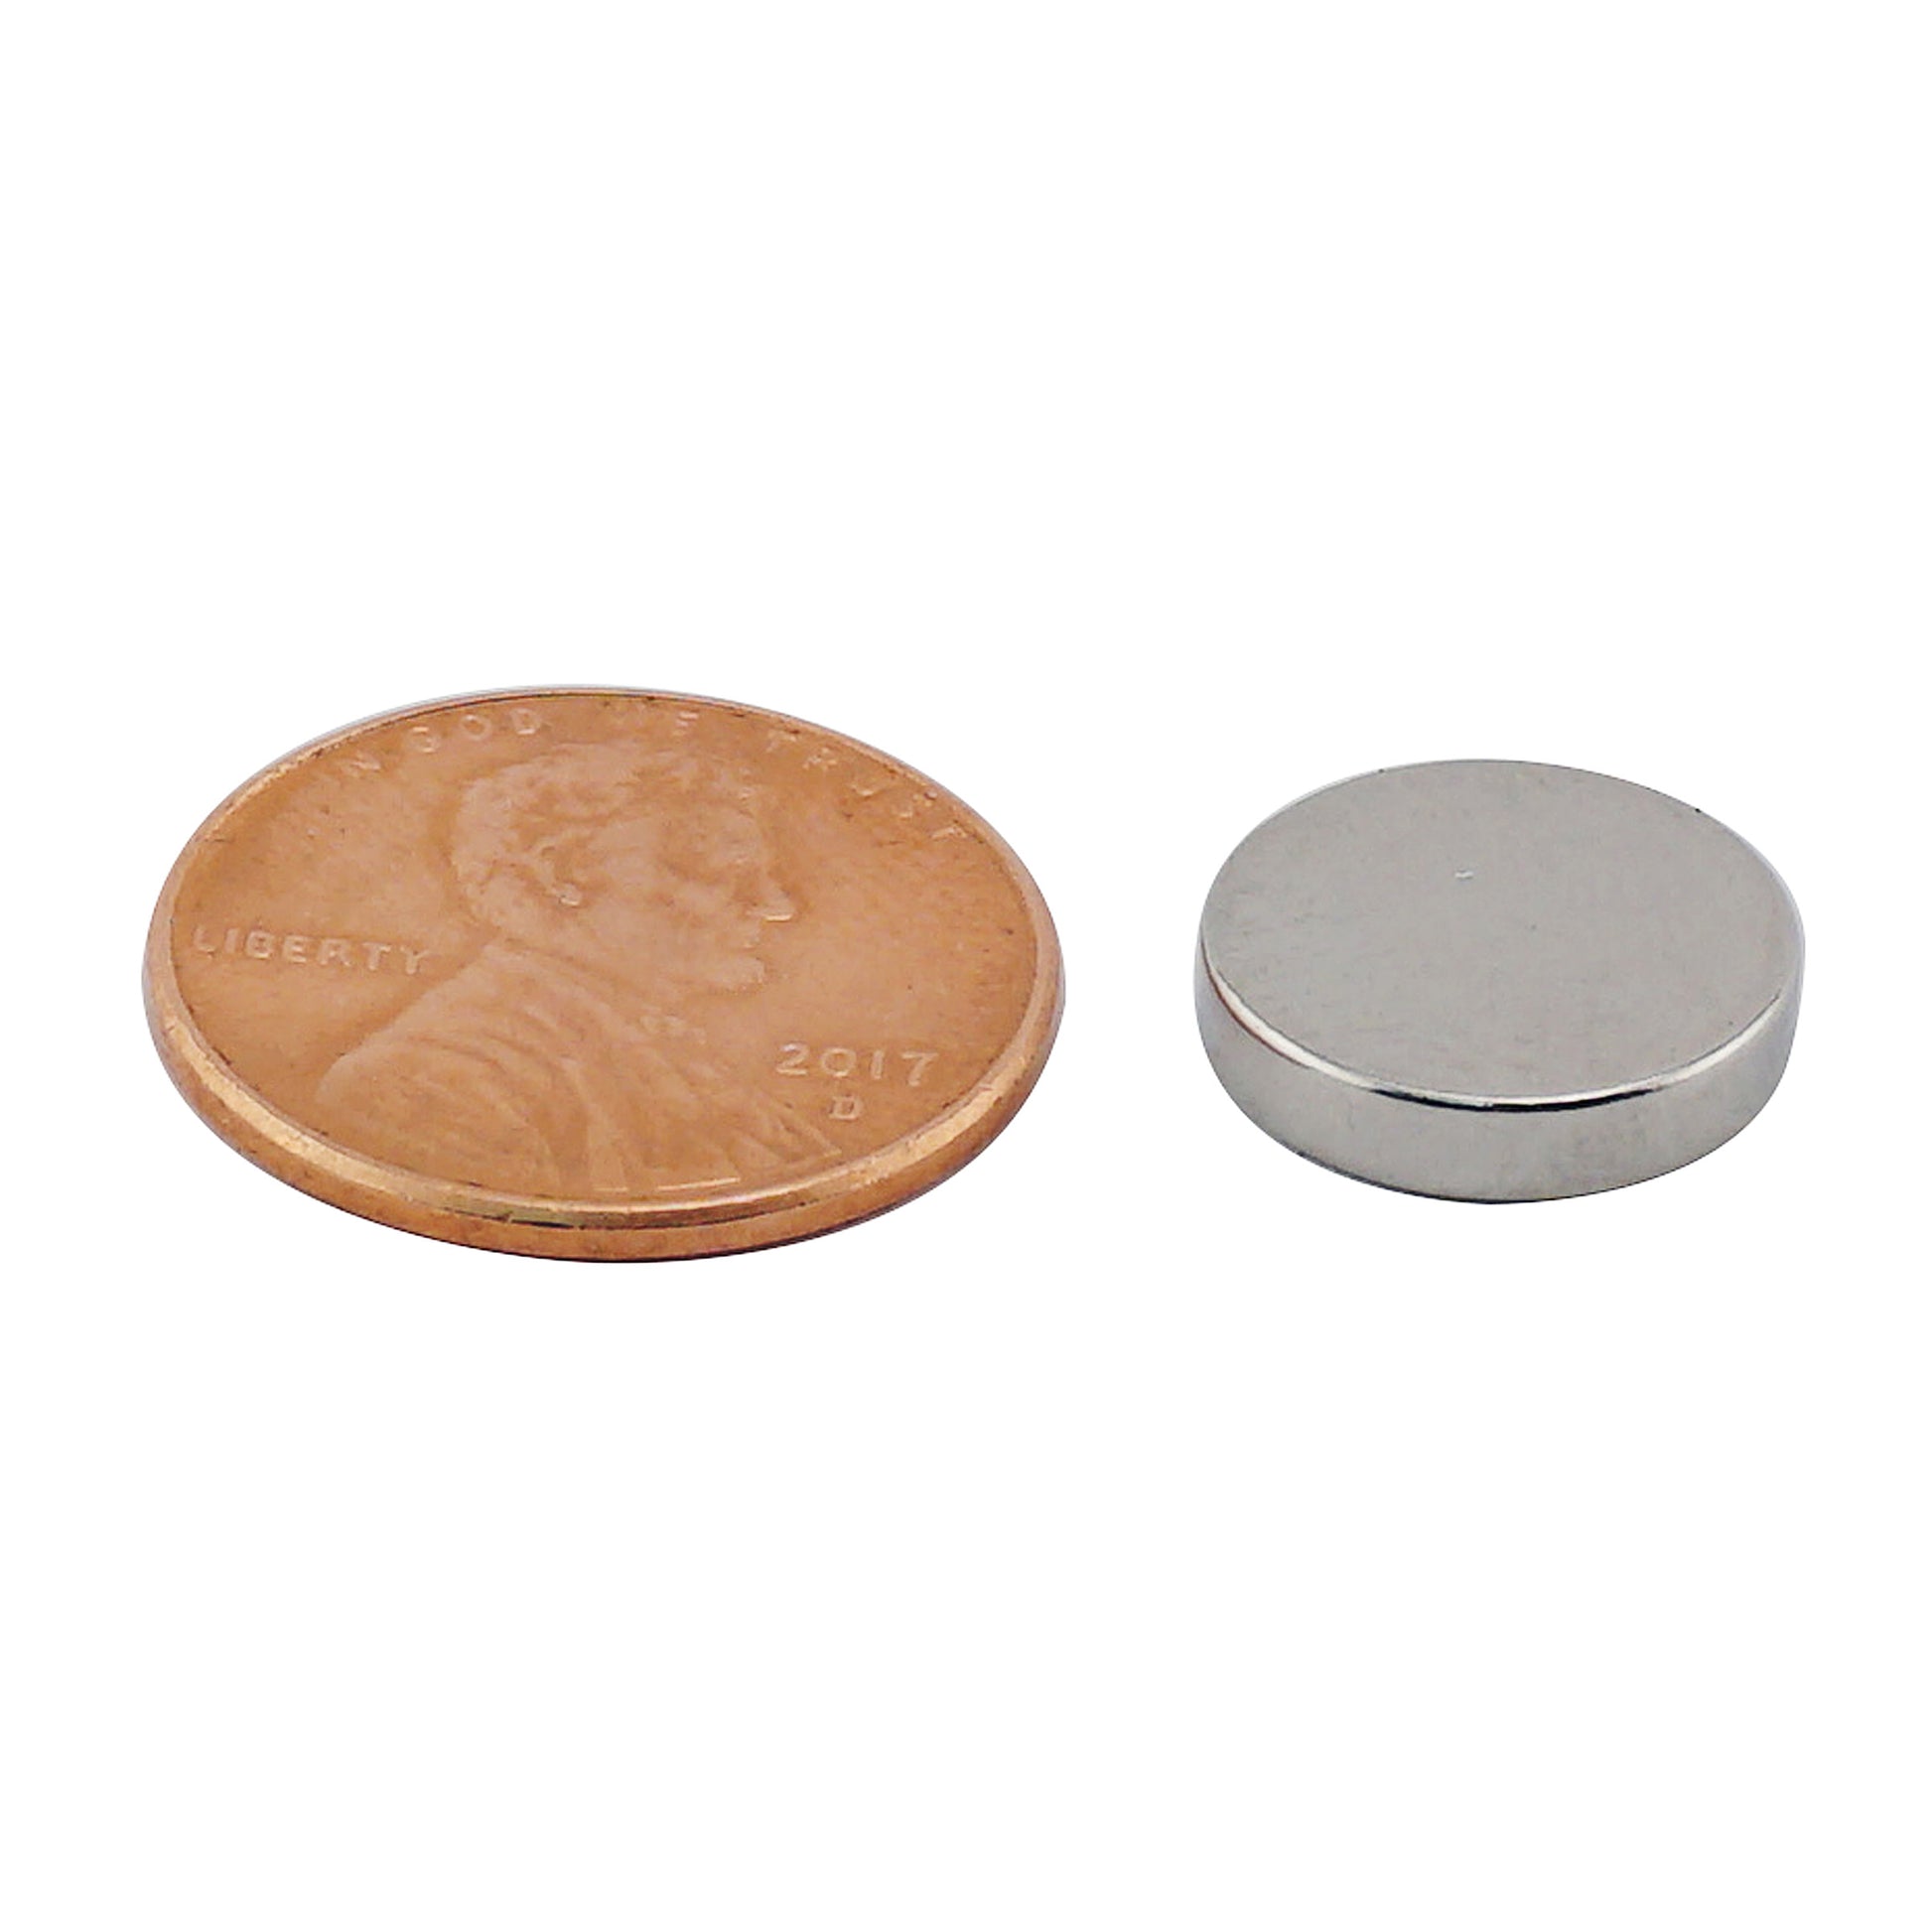 Load image into Gallery viewer, ND004903N Neodymium Disc Magnet - Compared to Penny for Size Reference